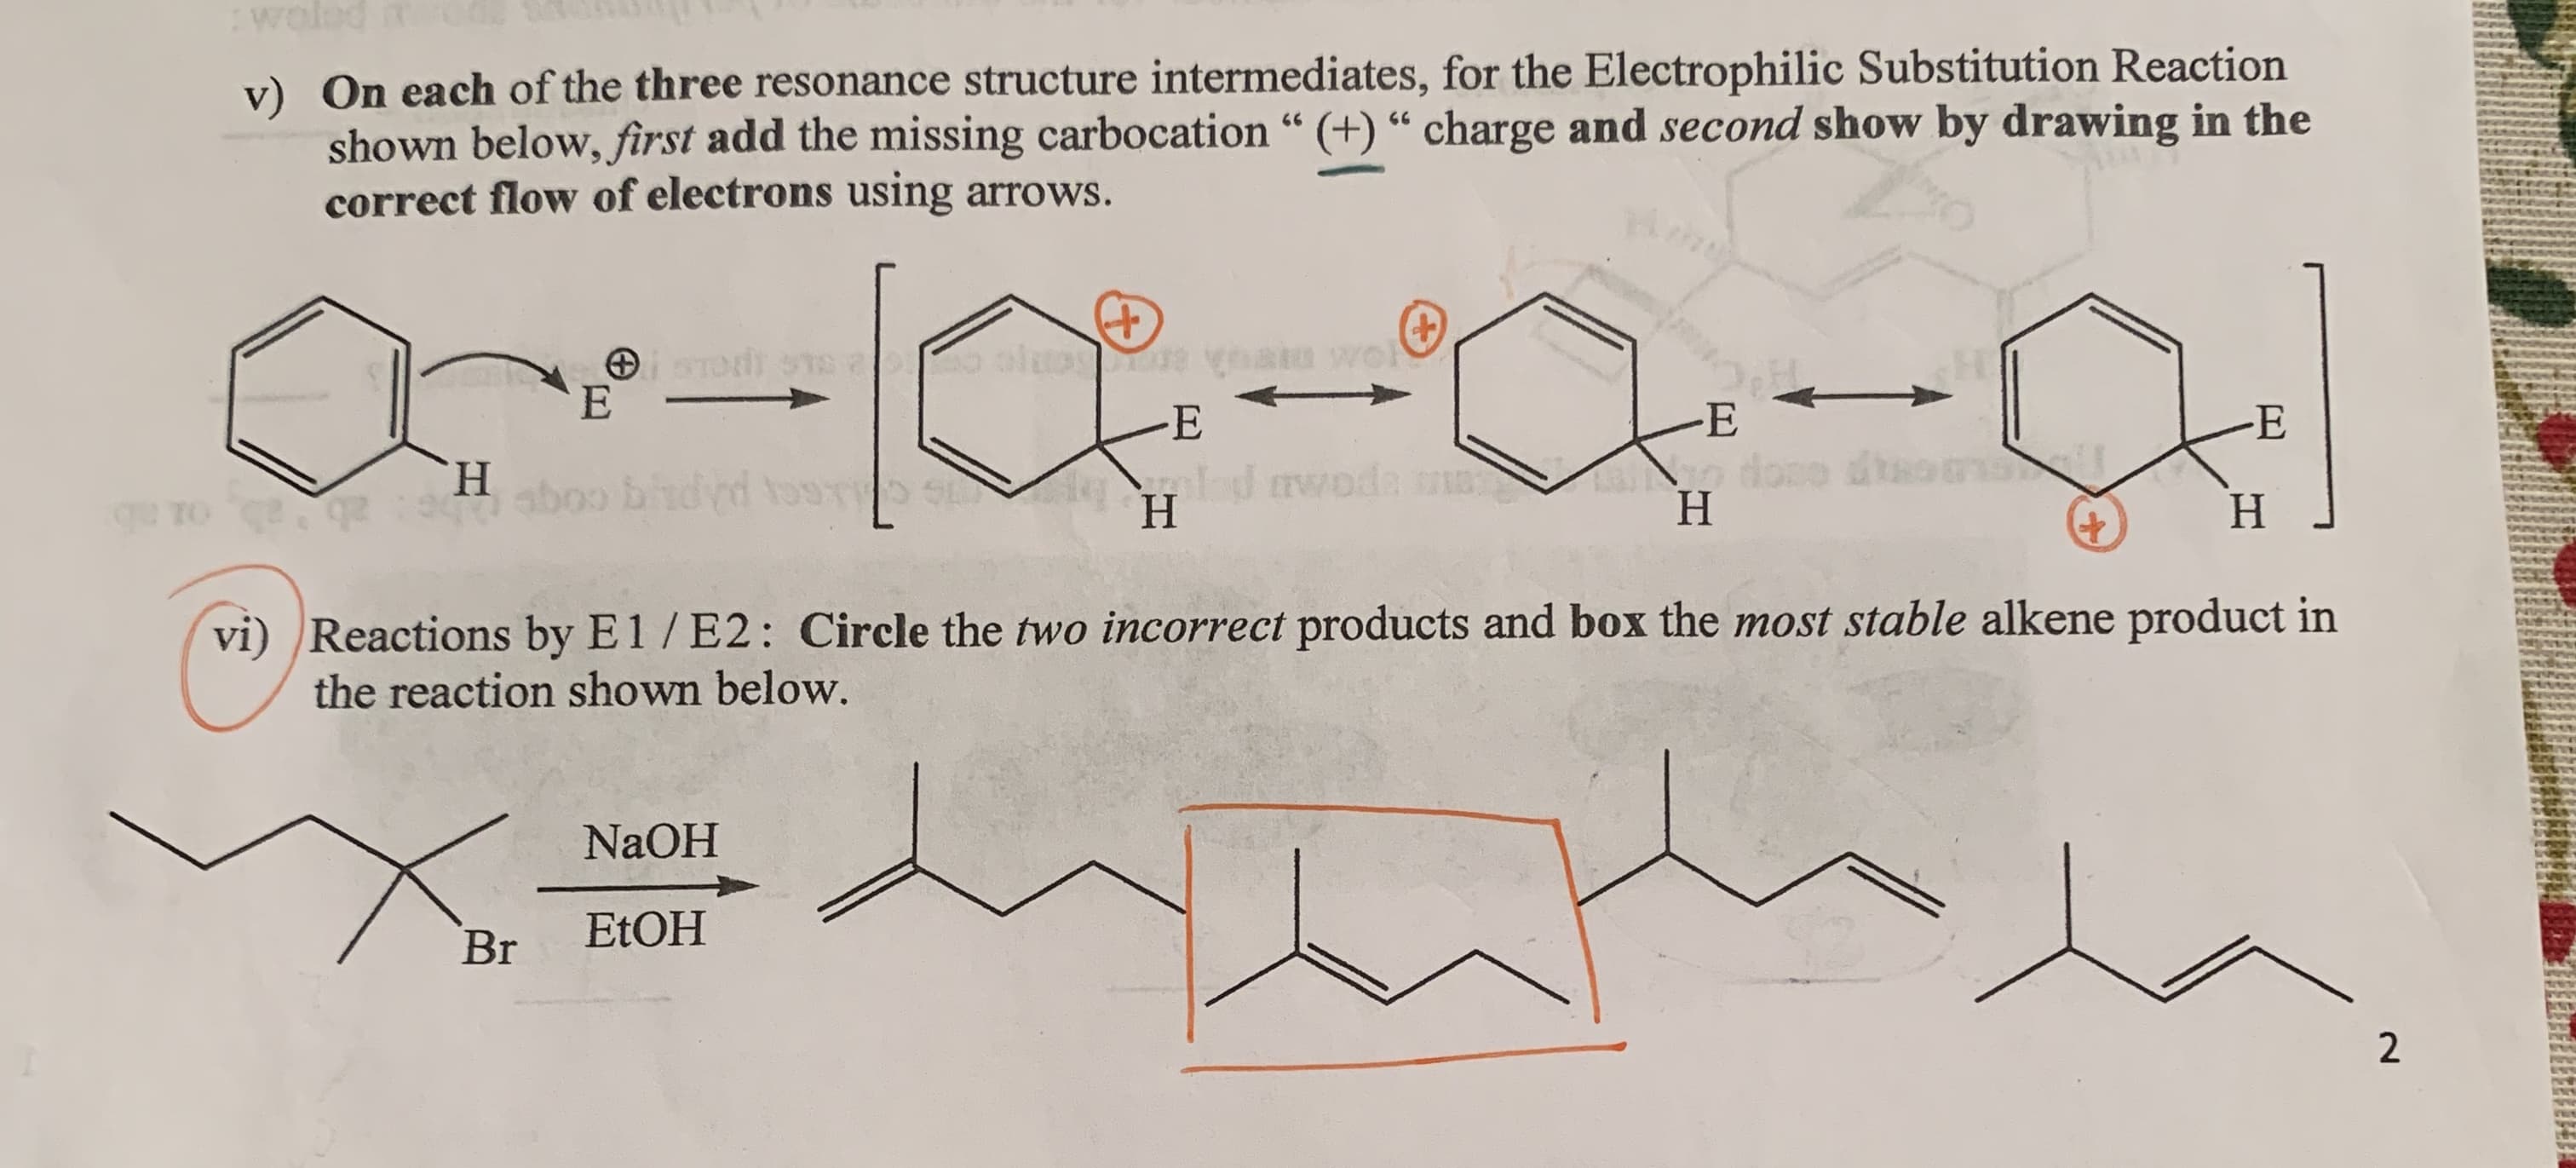 :woled
On each of the three resonance structure intermediates, for the Electrophilic Substitution Reaction
v)
shown below, first add the missing carbocation “ (+) “ charge and second show by drawing in the
correct flow of electrons using arrows.
66
66
-E
H.
alod rwoda
Н
abogo
Н
H.
vi)
Reactions by E1/E2: Circle the two incorrect products and box the most stable alkene product in
the reaction shown below.
NaOH
ETOH
Br
